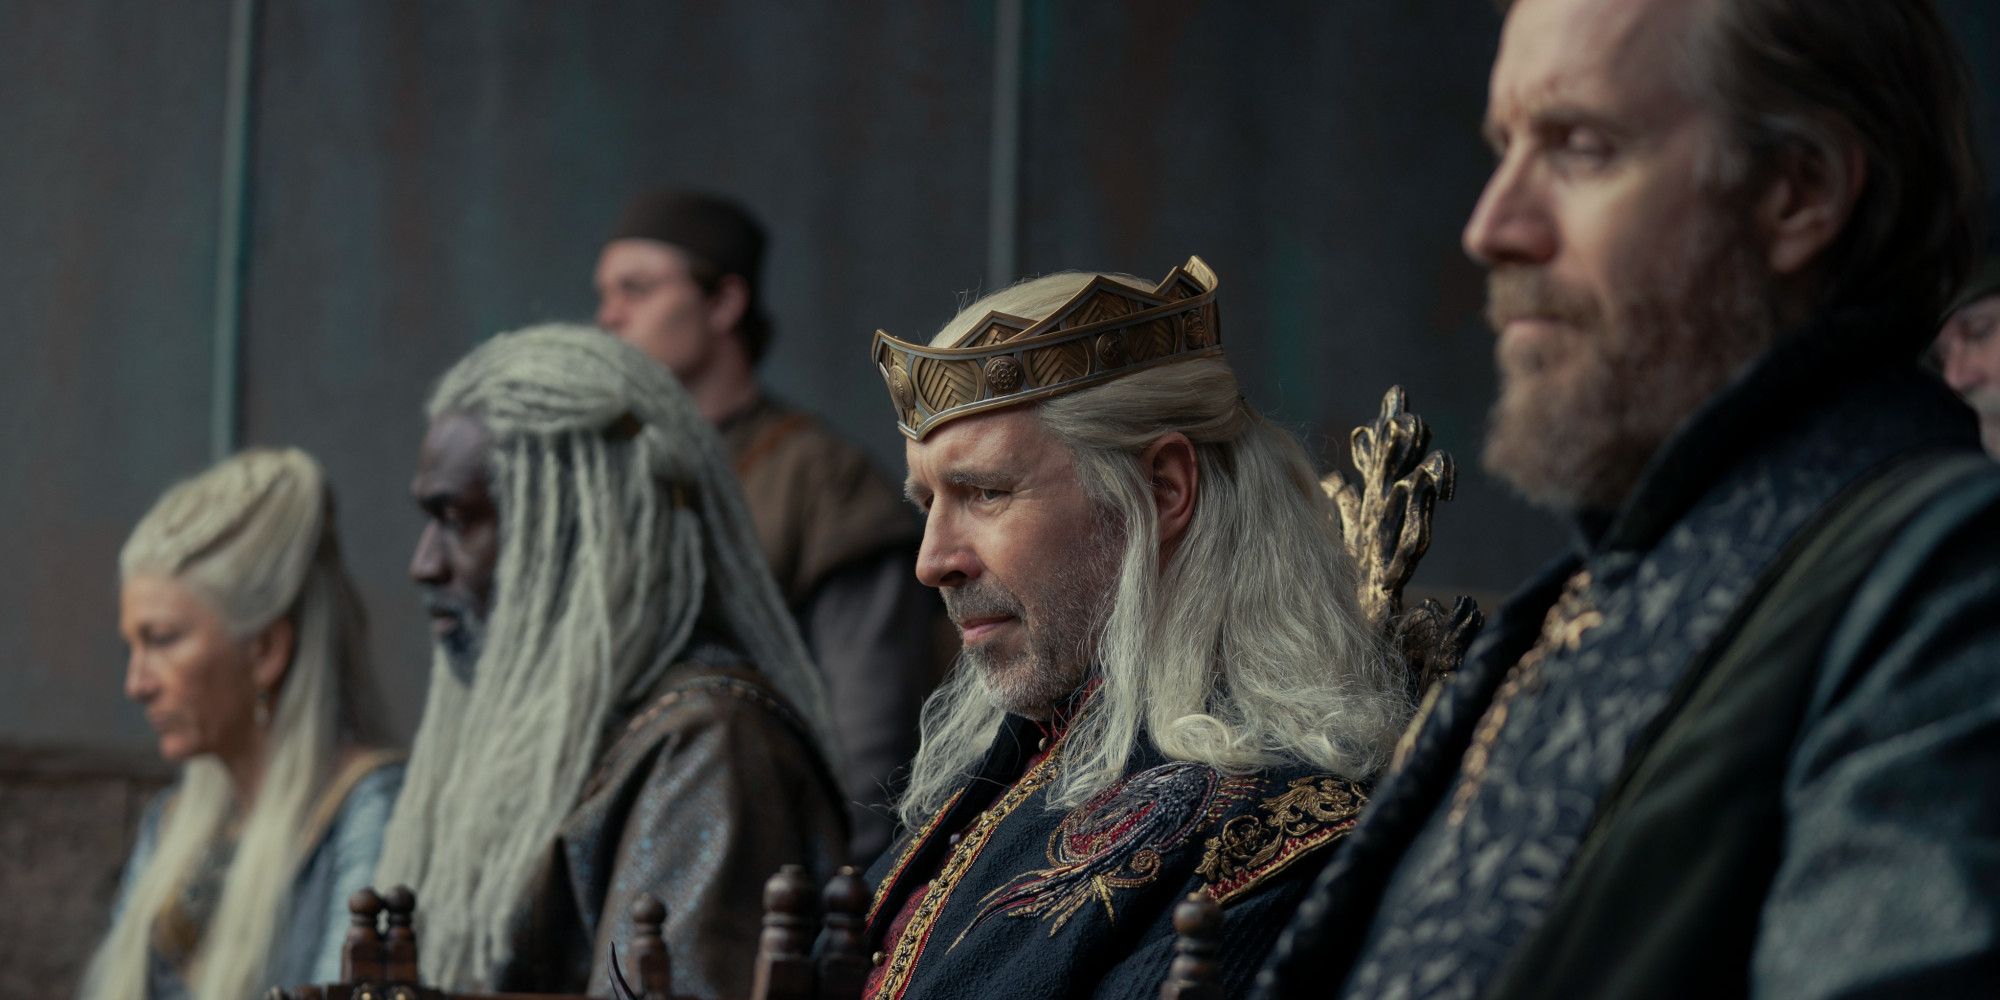 Paddy Considine as King Viserys in House of the Dragon